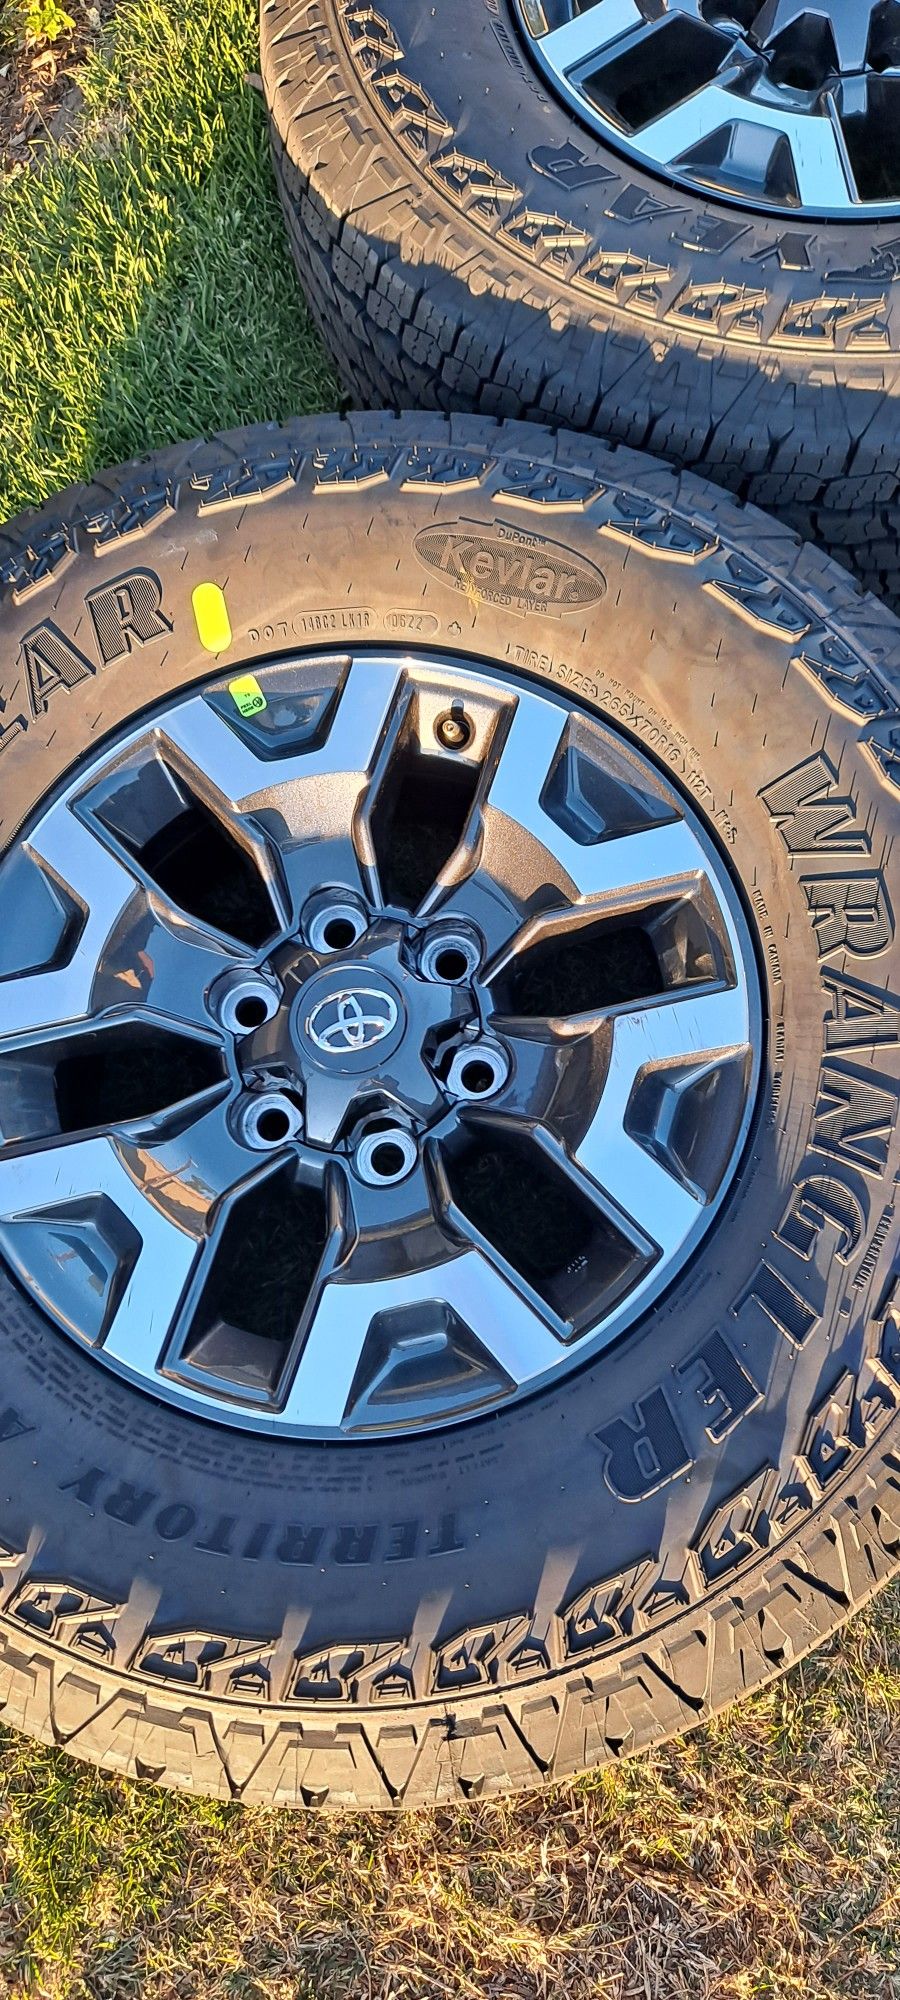 2022 BRAND NEW GOODYEAR WRANGLER TERRITORY ALL TERRAIN TIRES WITH BRAND NEW  TOYOTA WHEELS FOR TACOMA TUNDRA 4RUNNER SEQUOIA LANDCRUISER OR T-100 WITH  for Sale in Tustin, CA - OfferUp